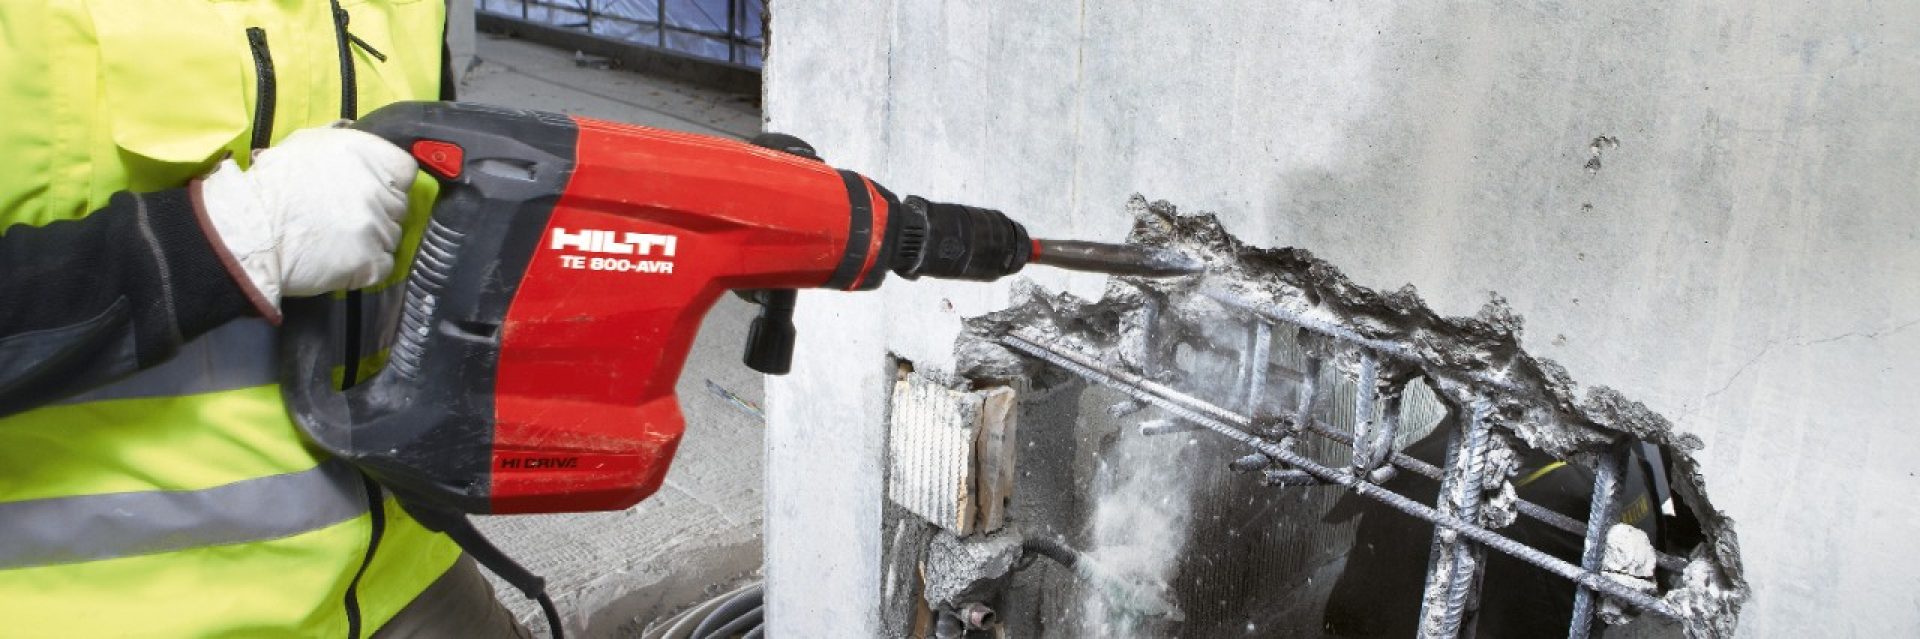 Hilti active vibration reduction system in breakers